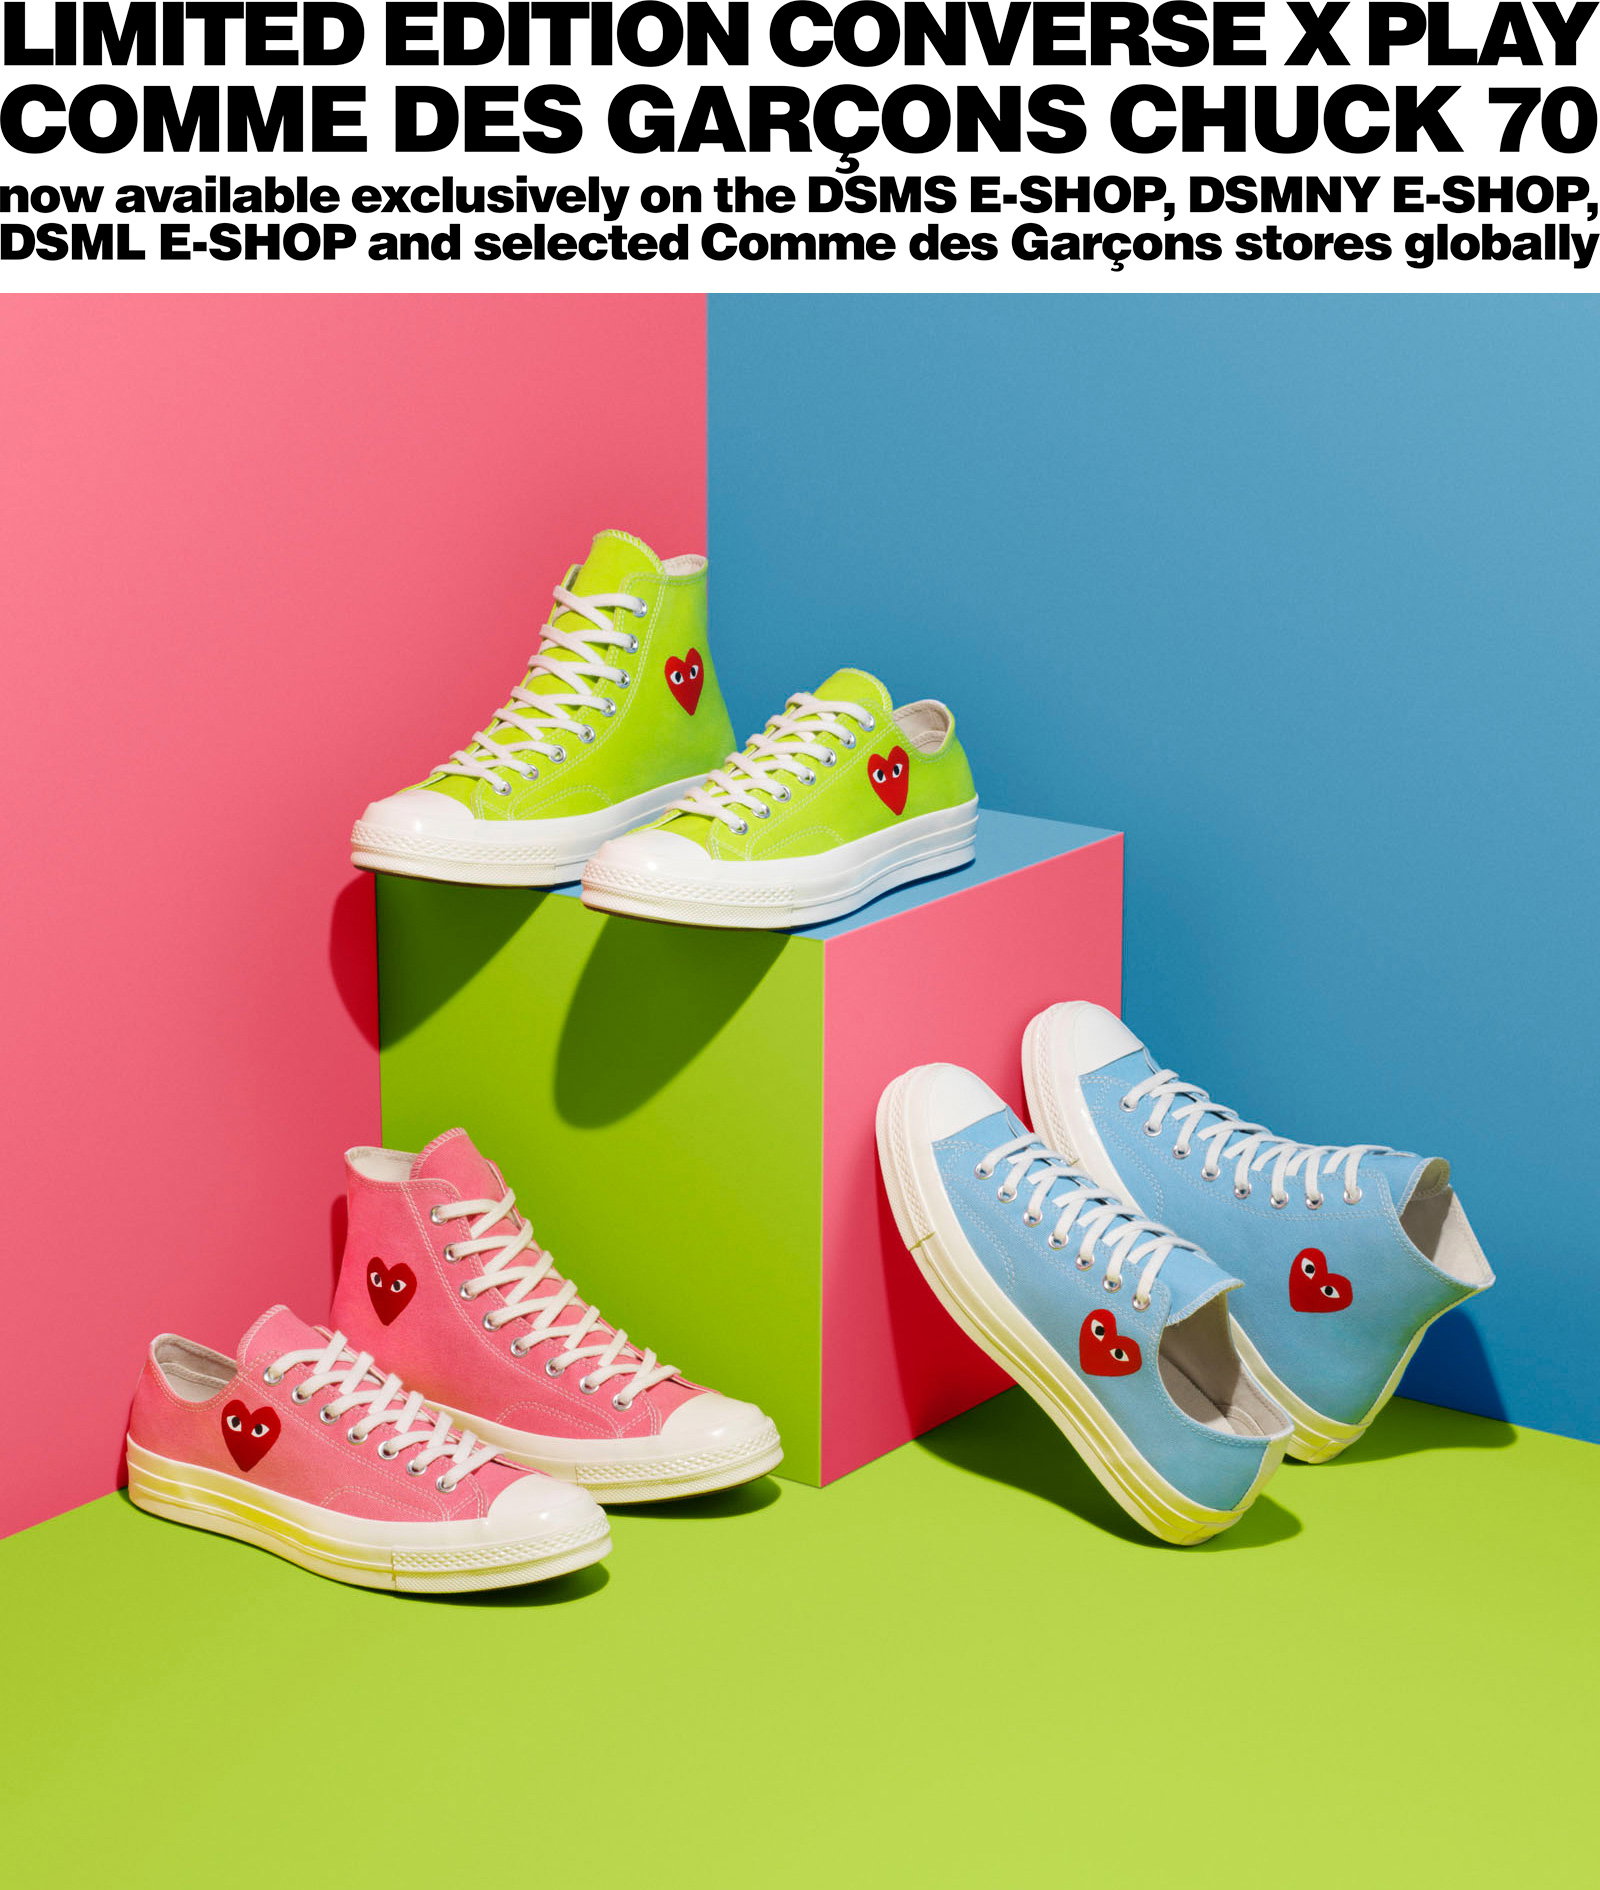 Dover Street Market: LIMITED CONVERSE X PLAY COMME DES GARÇONS CHUCK 70 NOW AVAILABLE THE DSMS E-SHOP | Milled